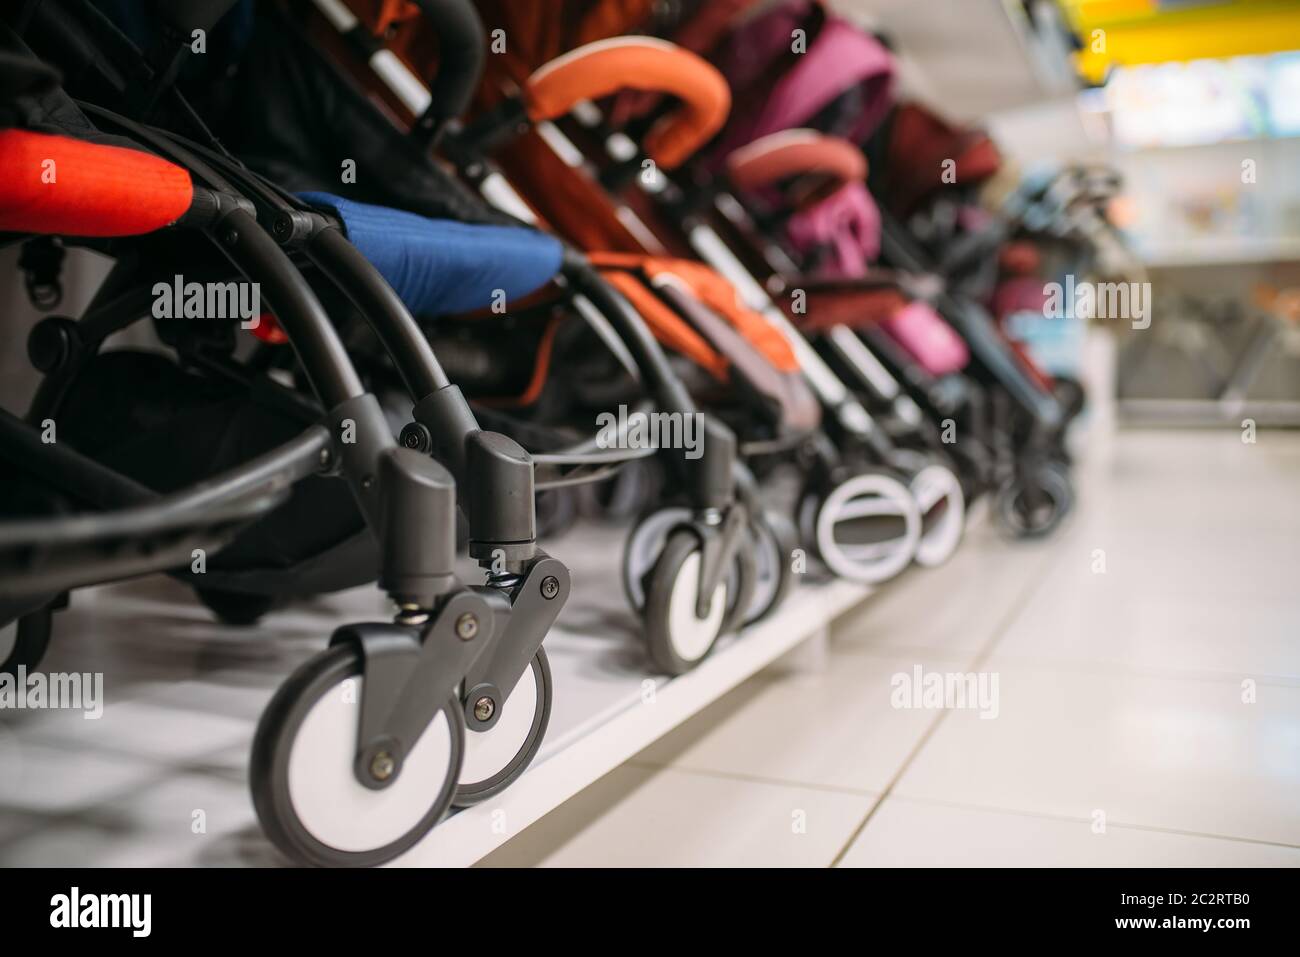 shop for baby strollers